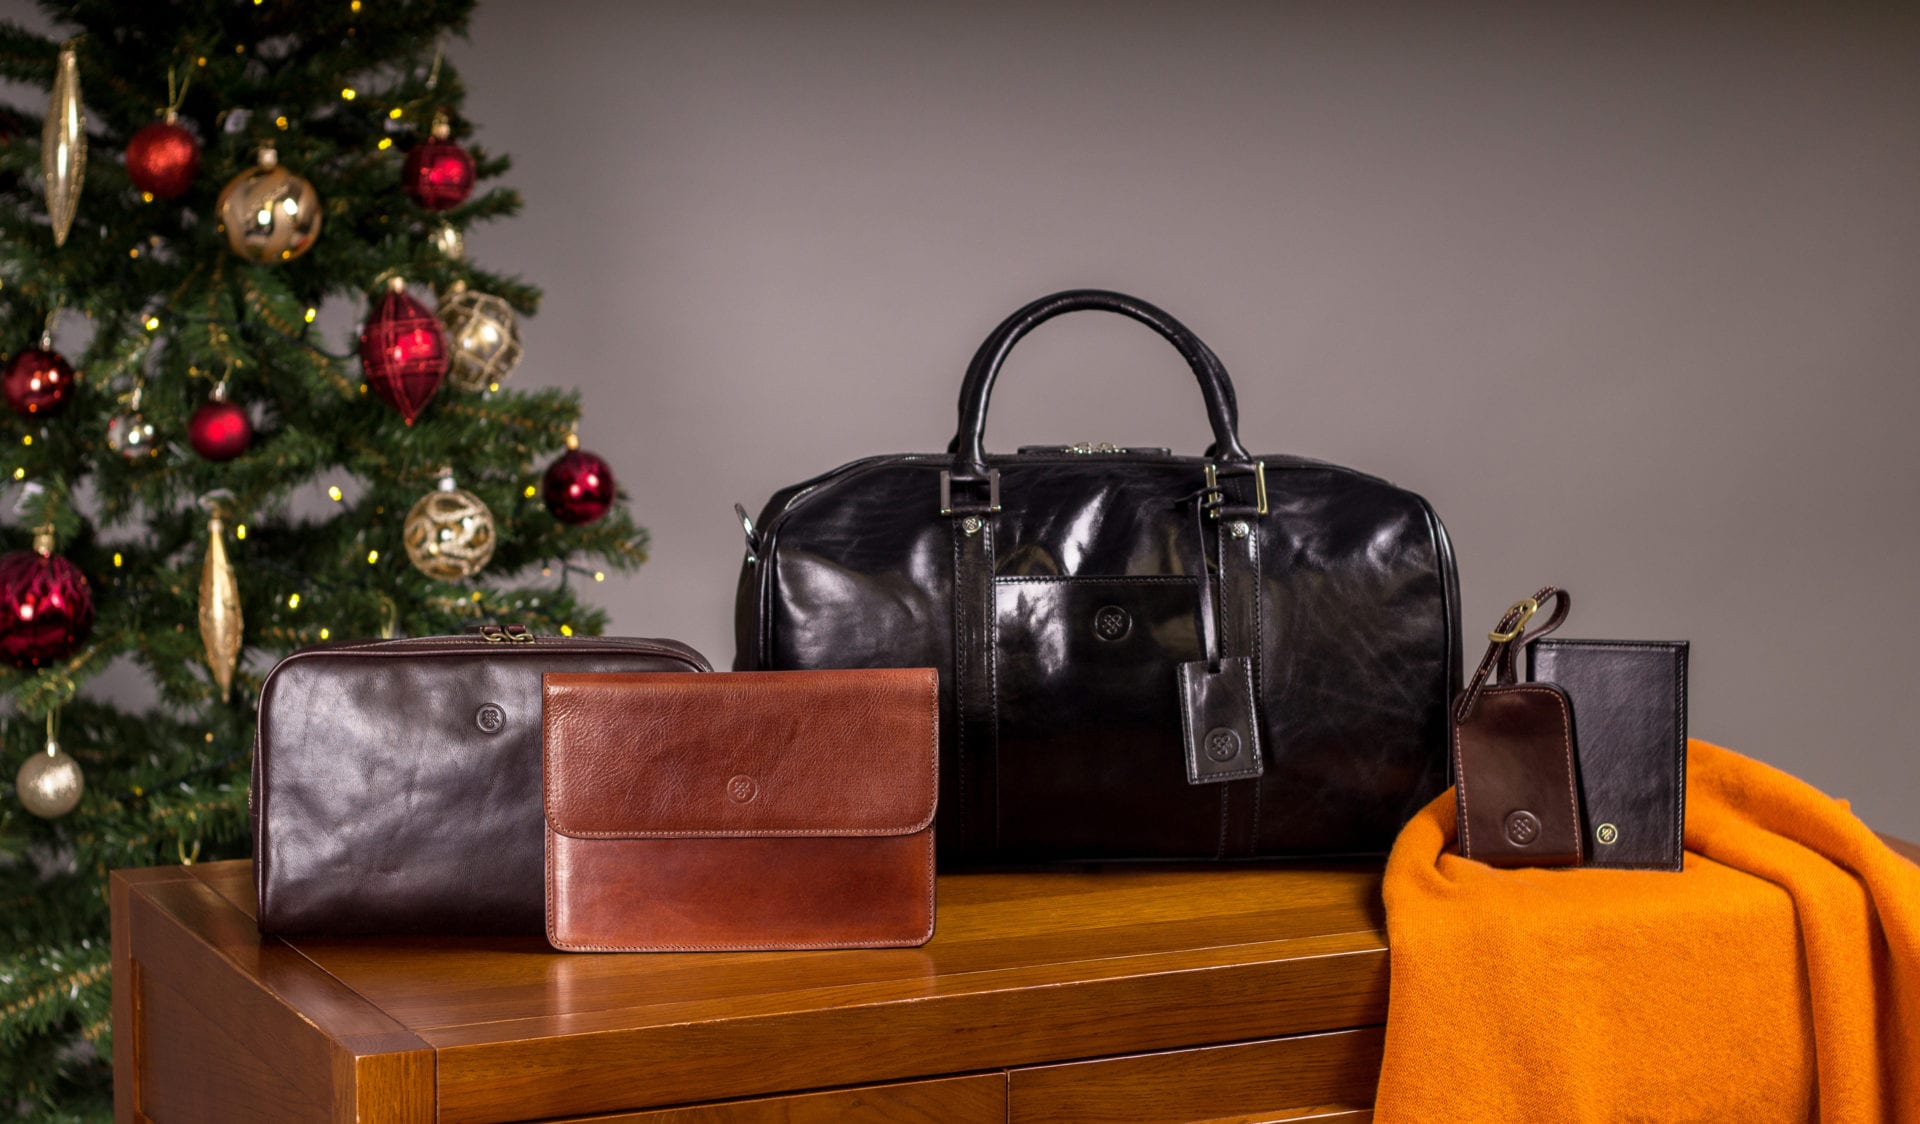 gift guide for jet setters